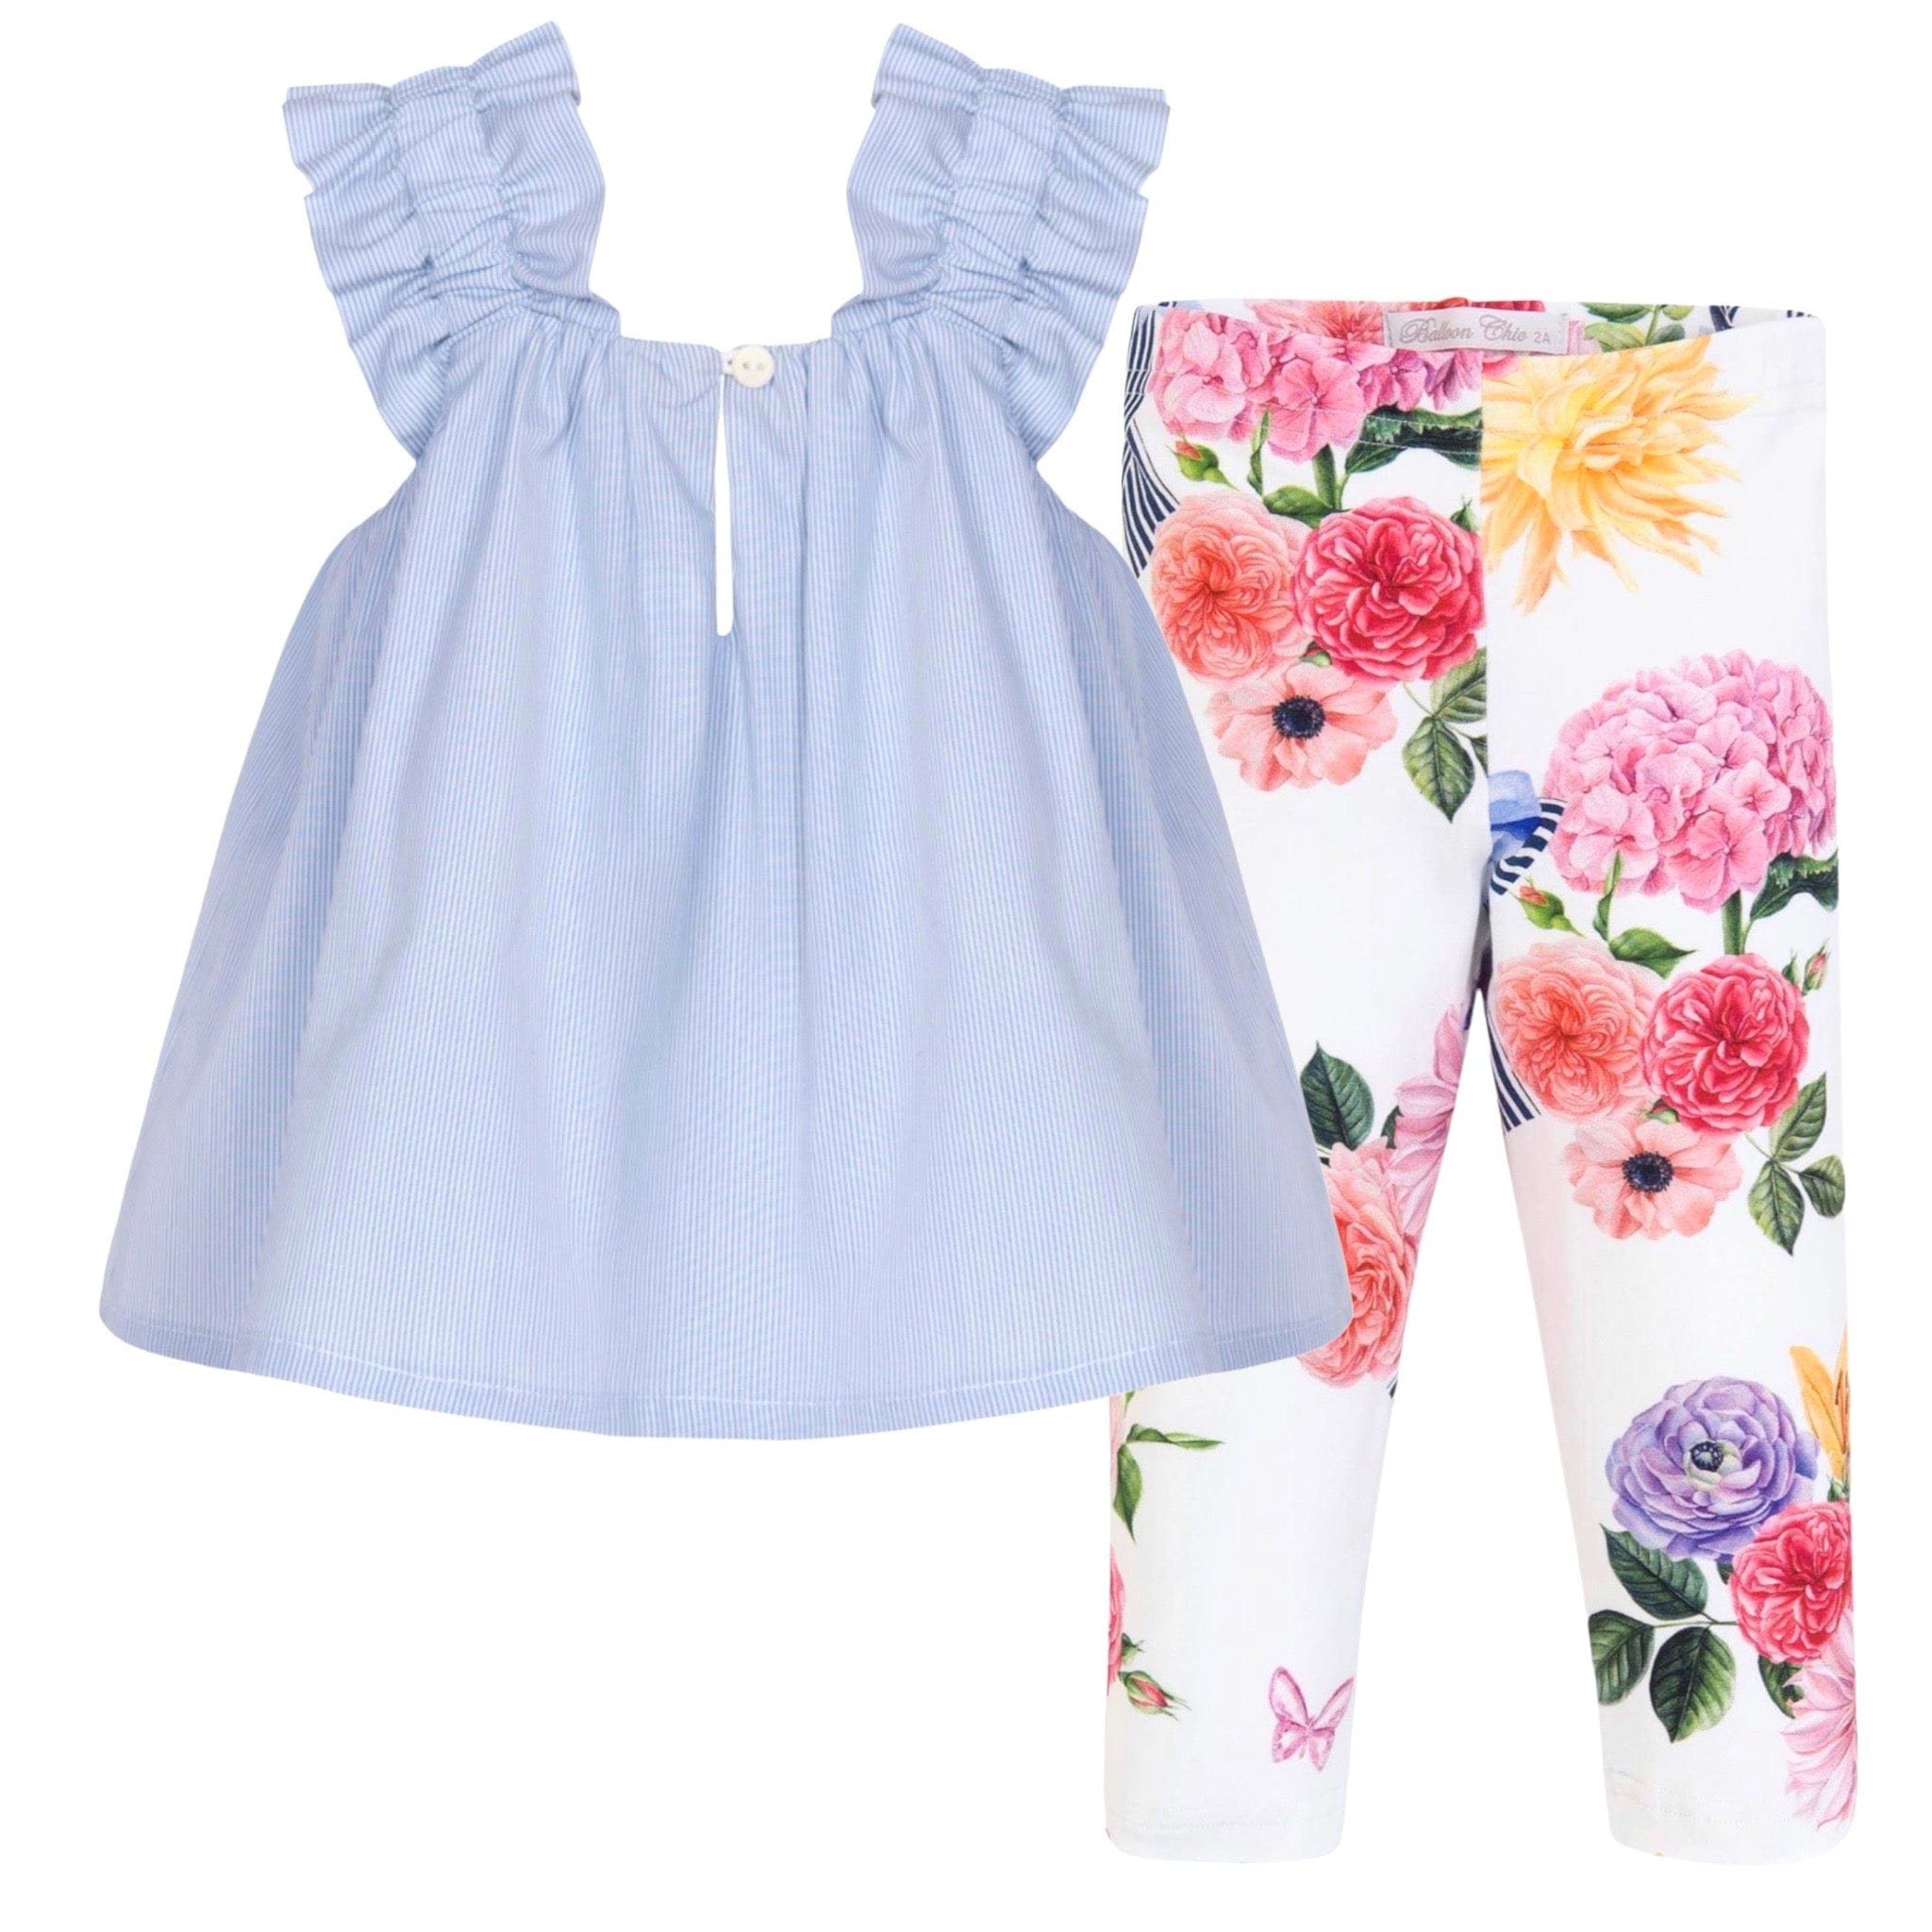 Balloon Chic White Floral Girls Leggings Outfit